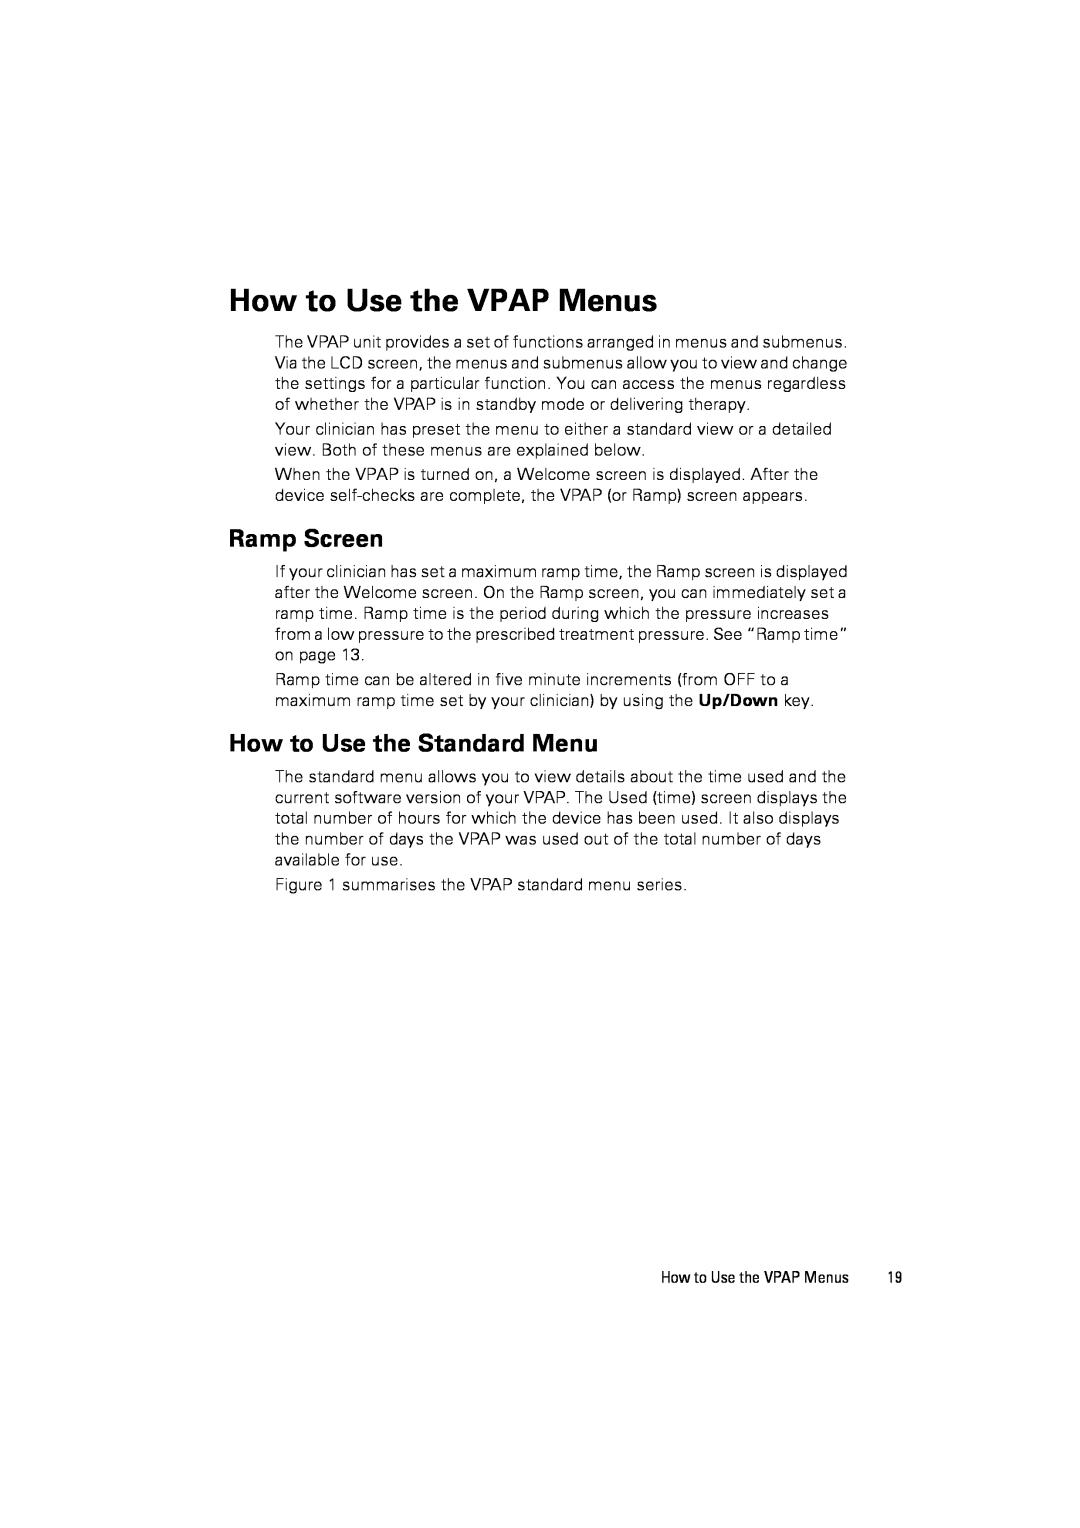 ResMed III user manual How to Use the VPAP Menus, Ramp Screen, How to Use the Standard Menu 